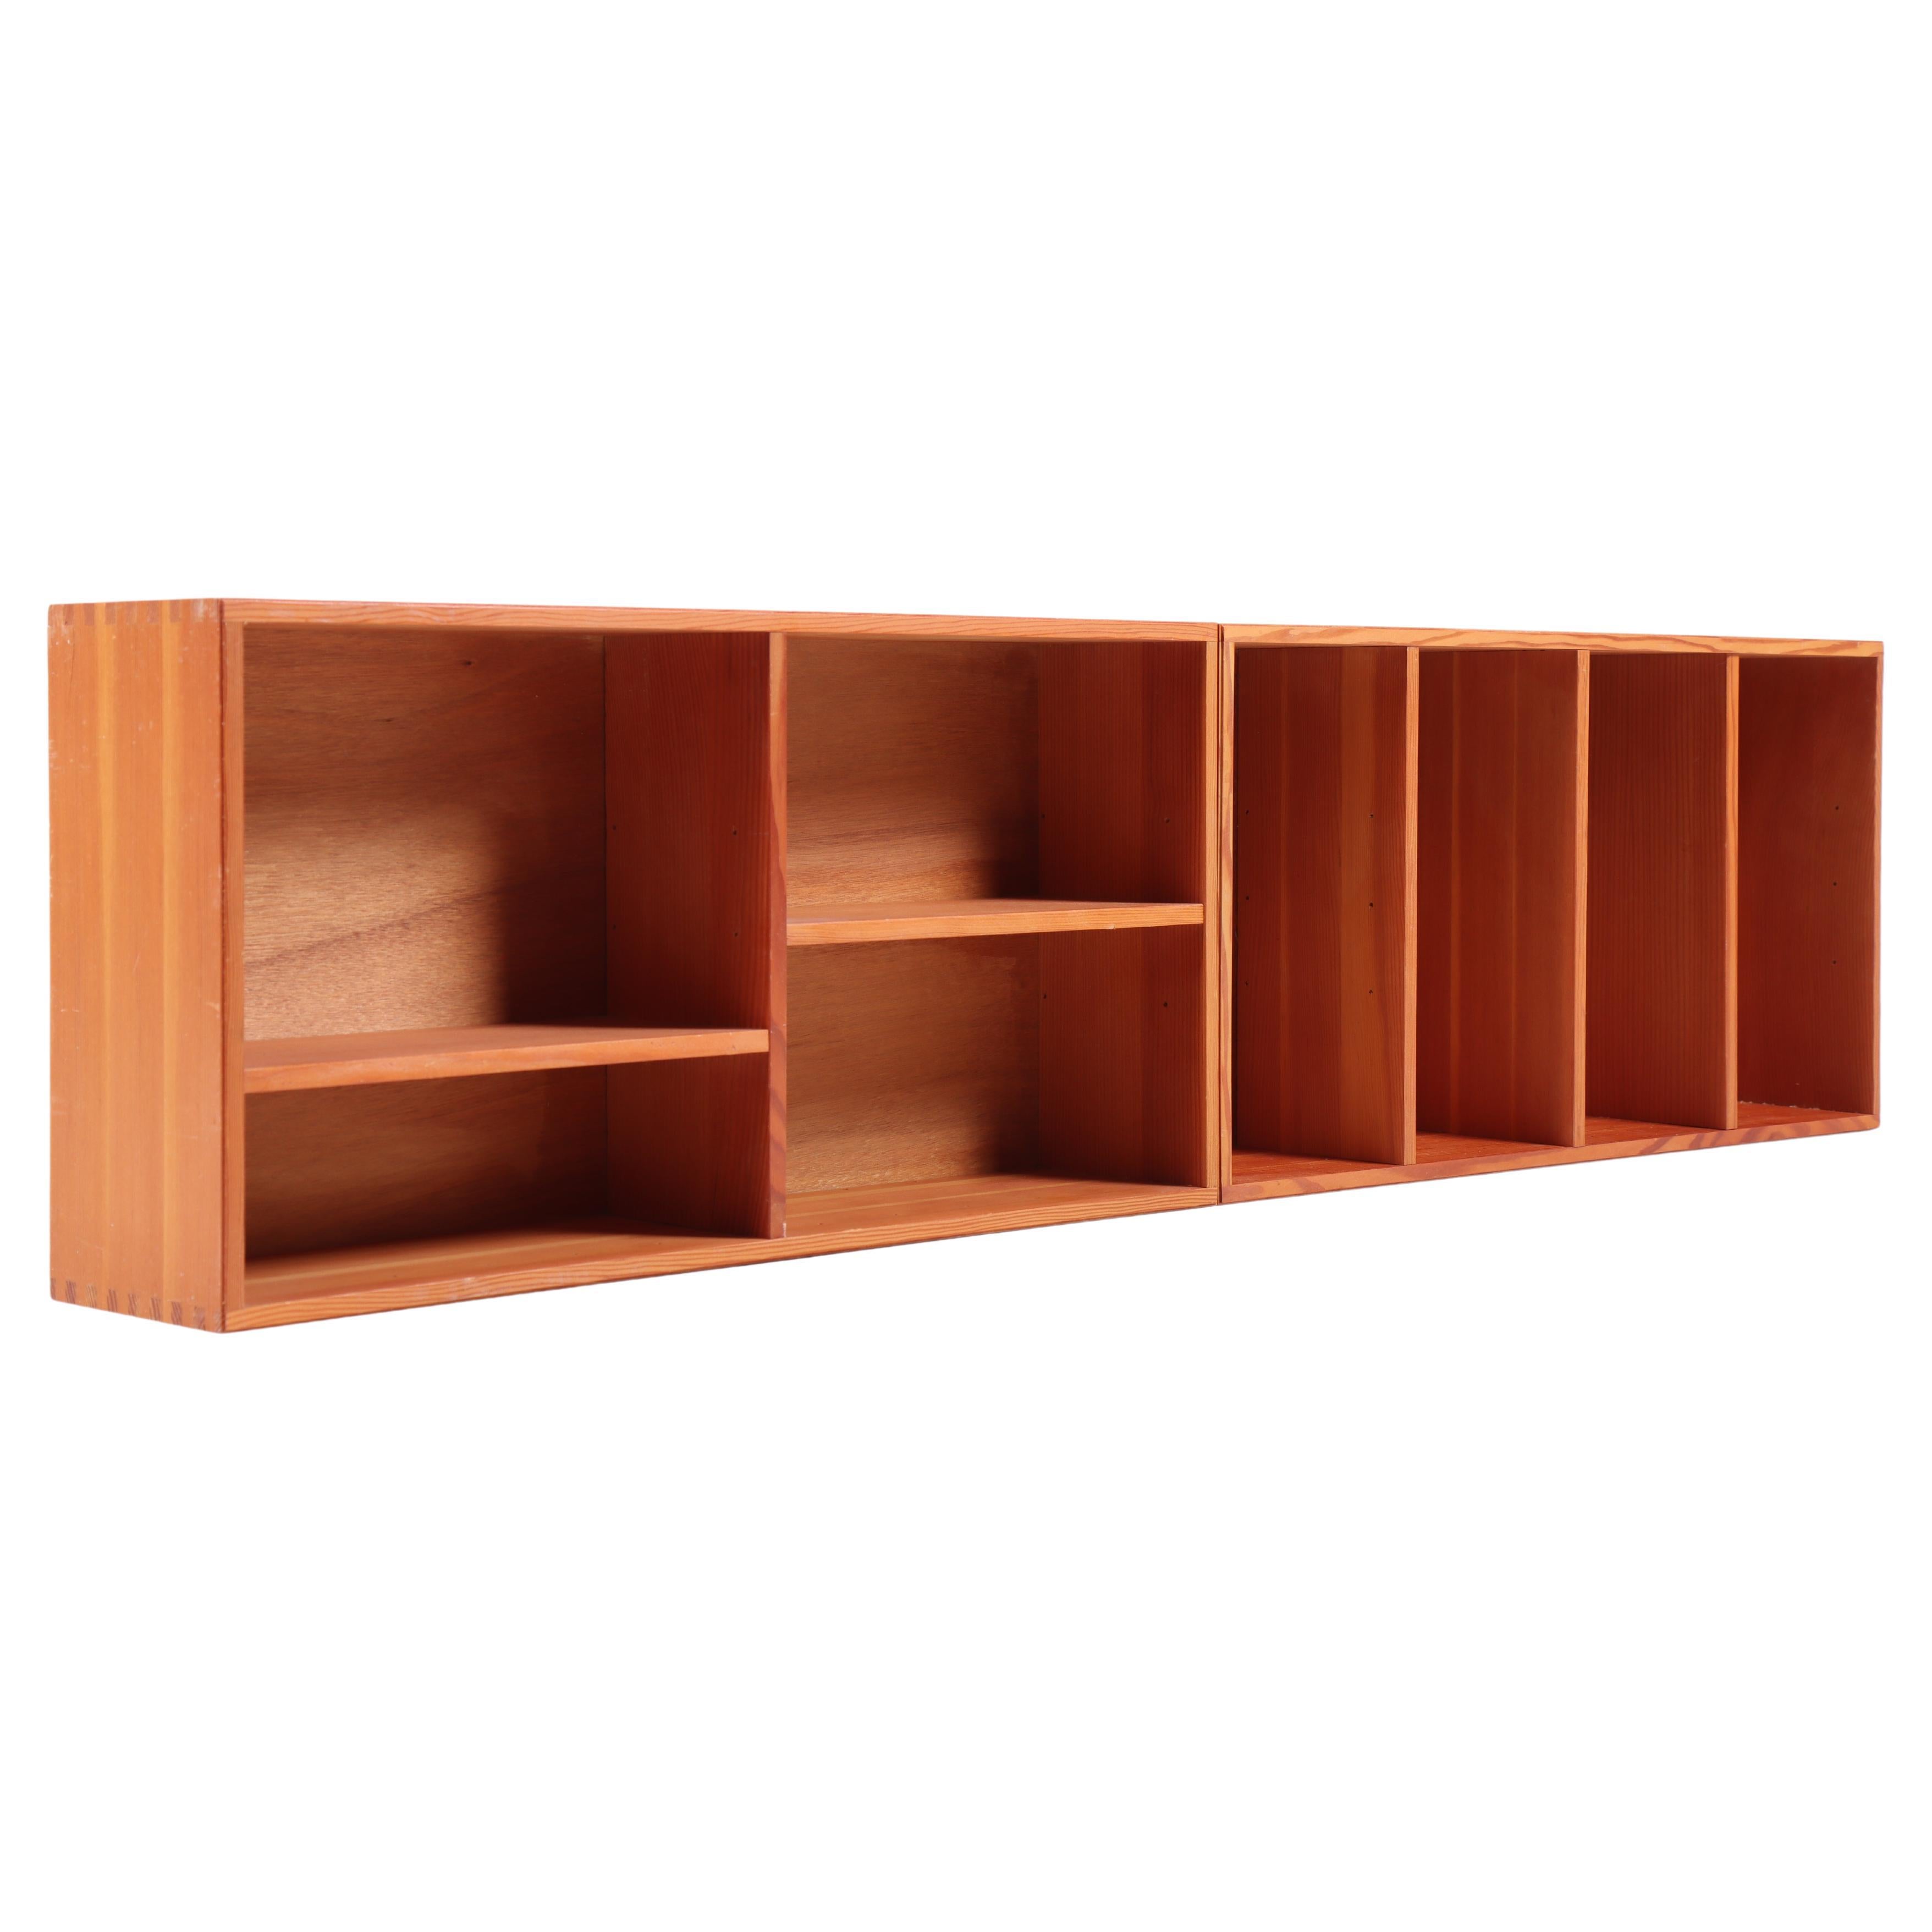 Pair Wall-Mounted Bookcases in Solid Oregon Pine, Made in Denmark, 1970s For Sale